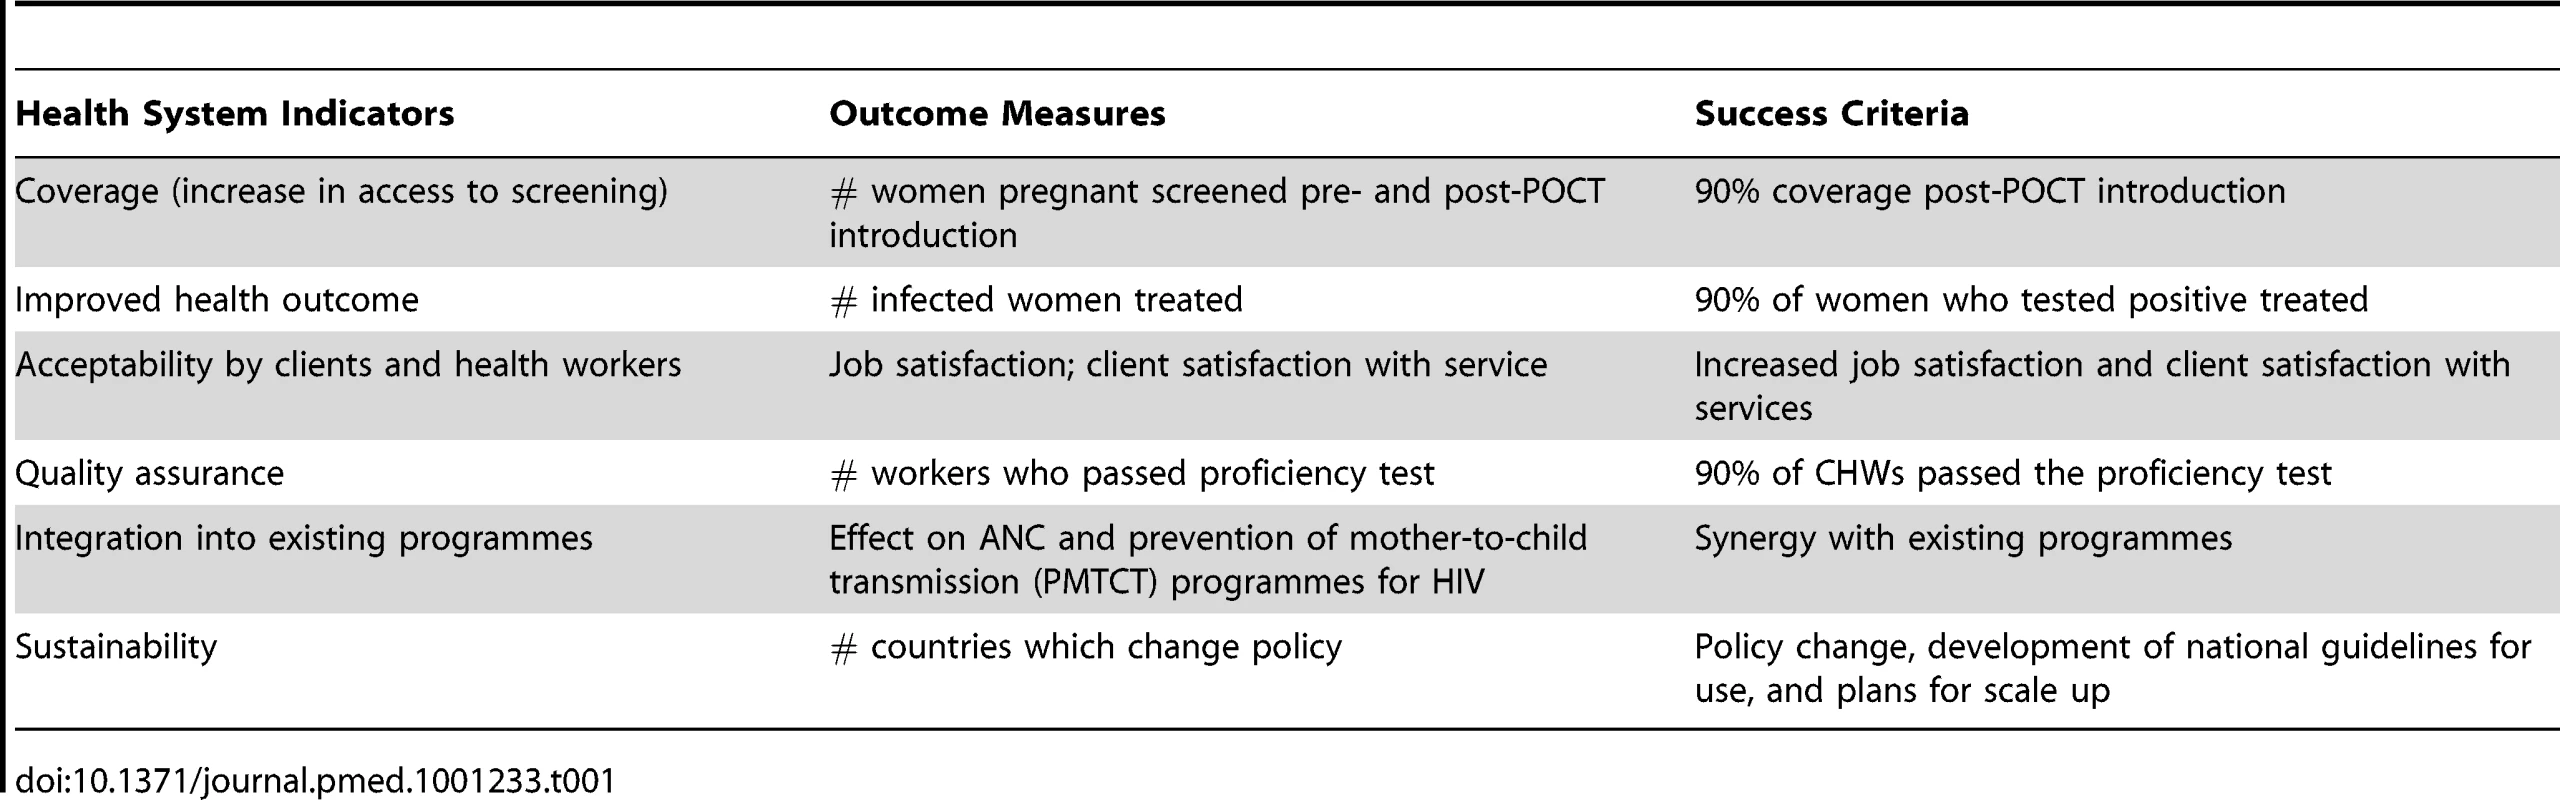 Health systems indicators and proposed success criteria.